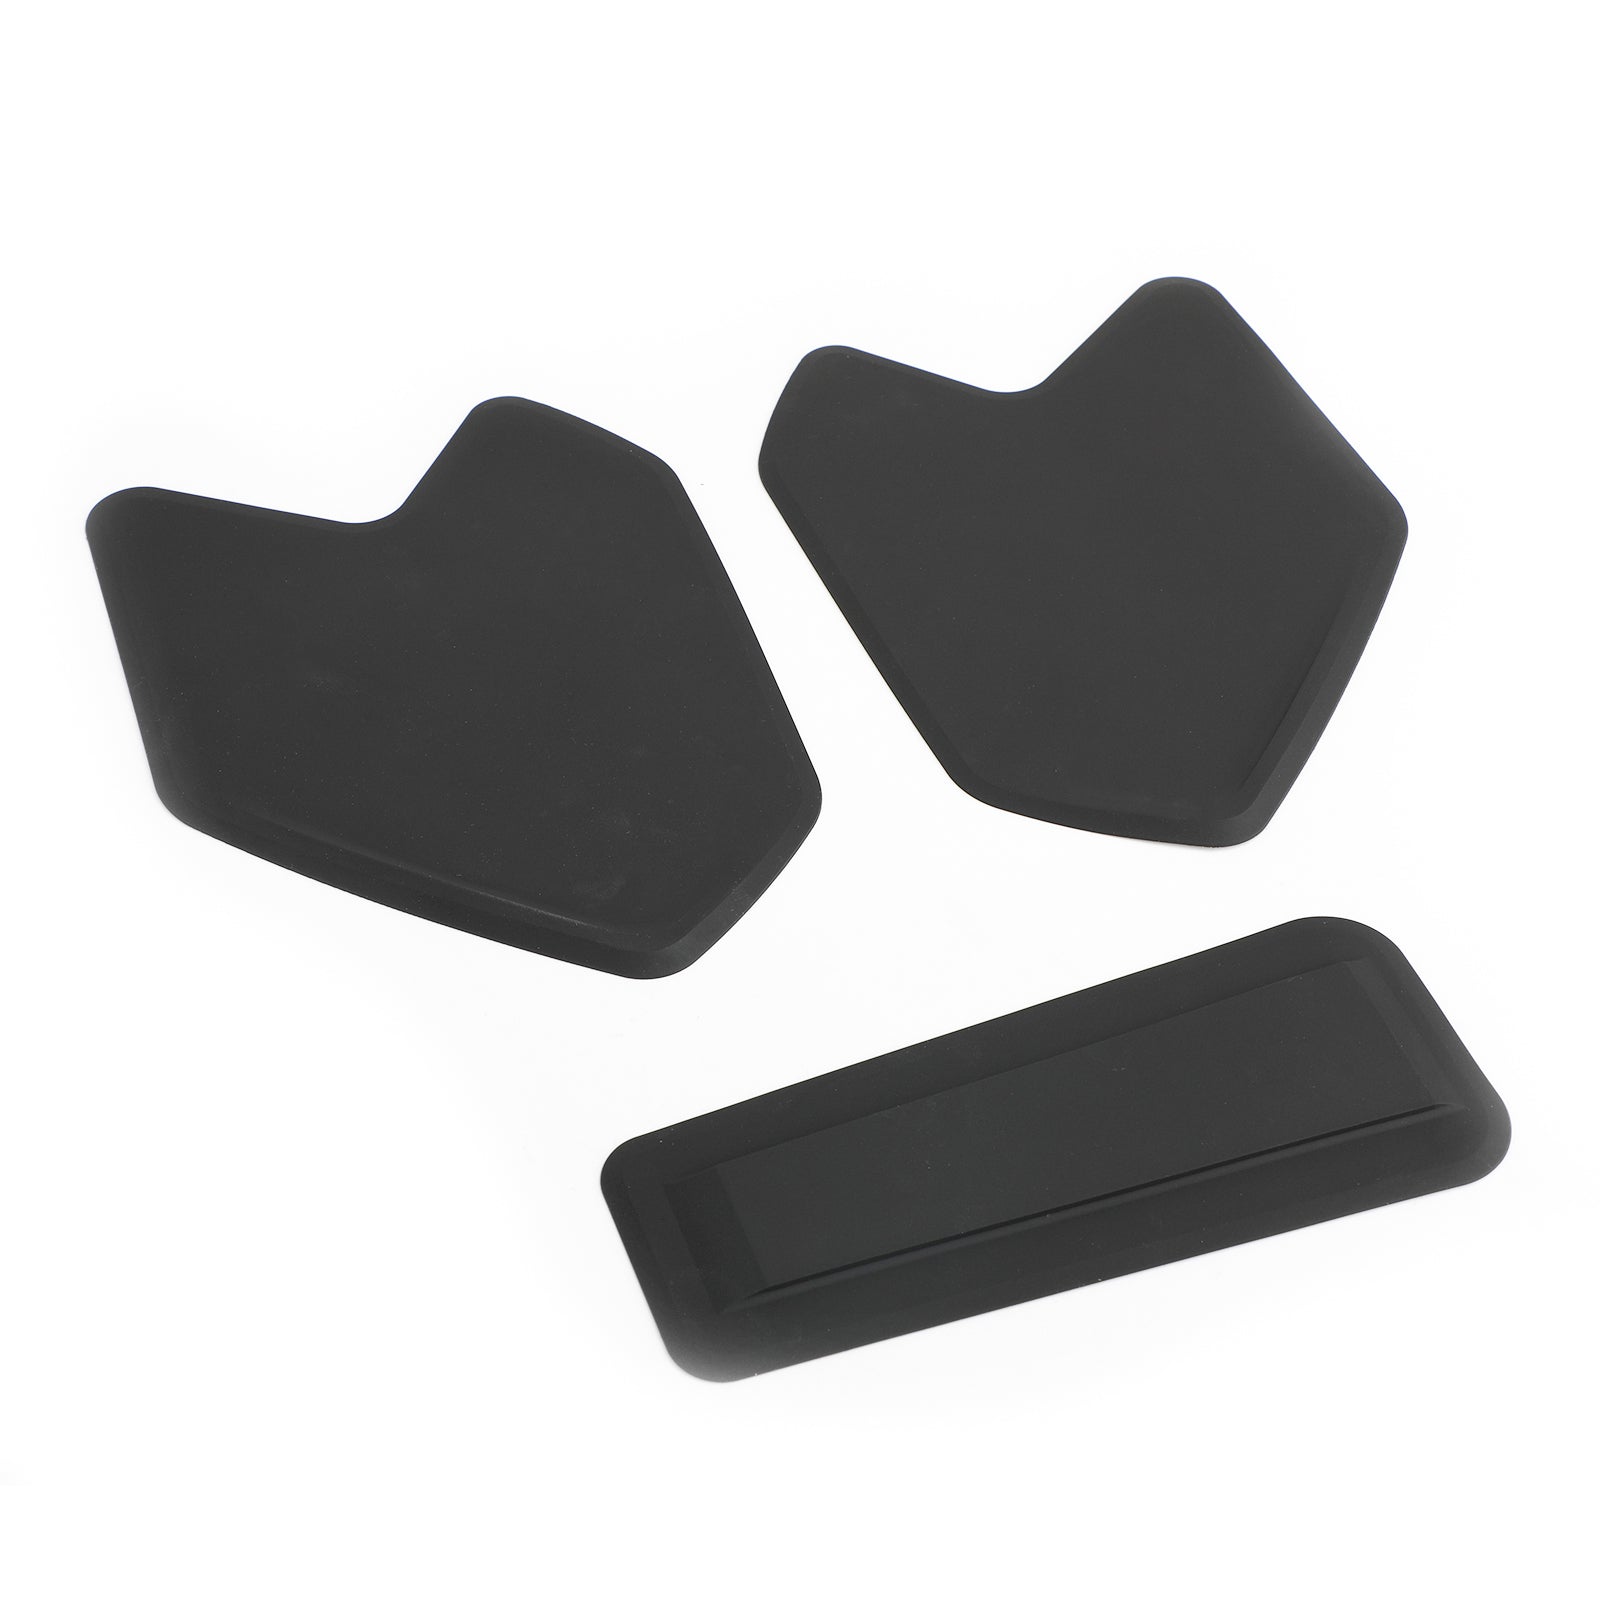 BMW R1200GS LC Adv 2008-2017 Side Tank Traction Grips Pads Protector